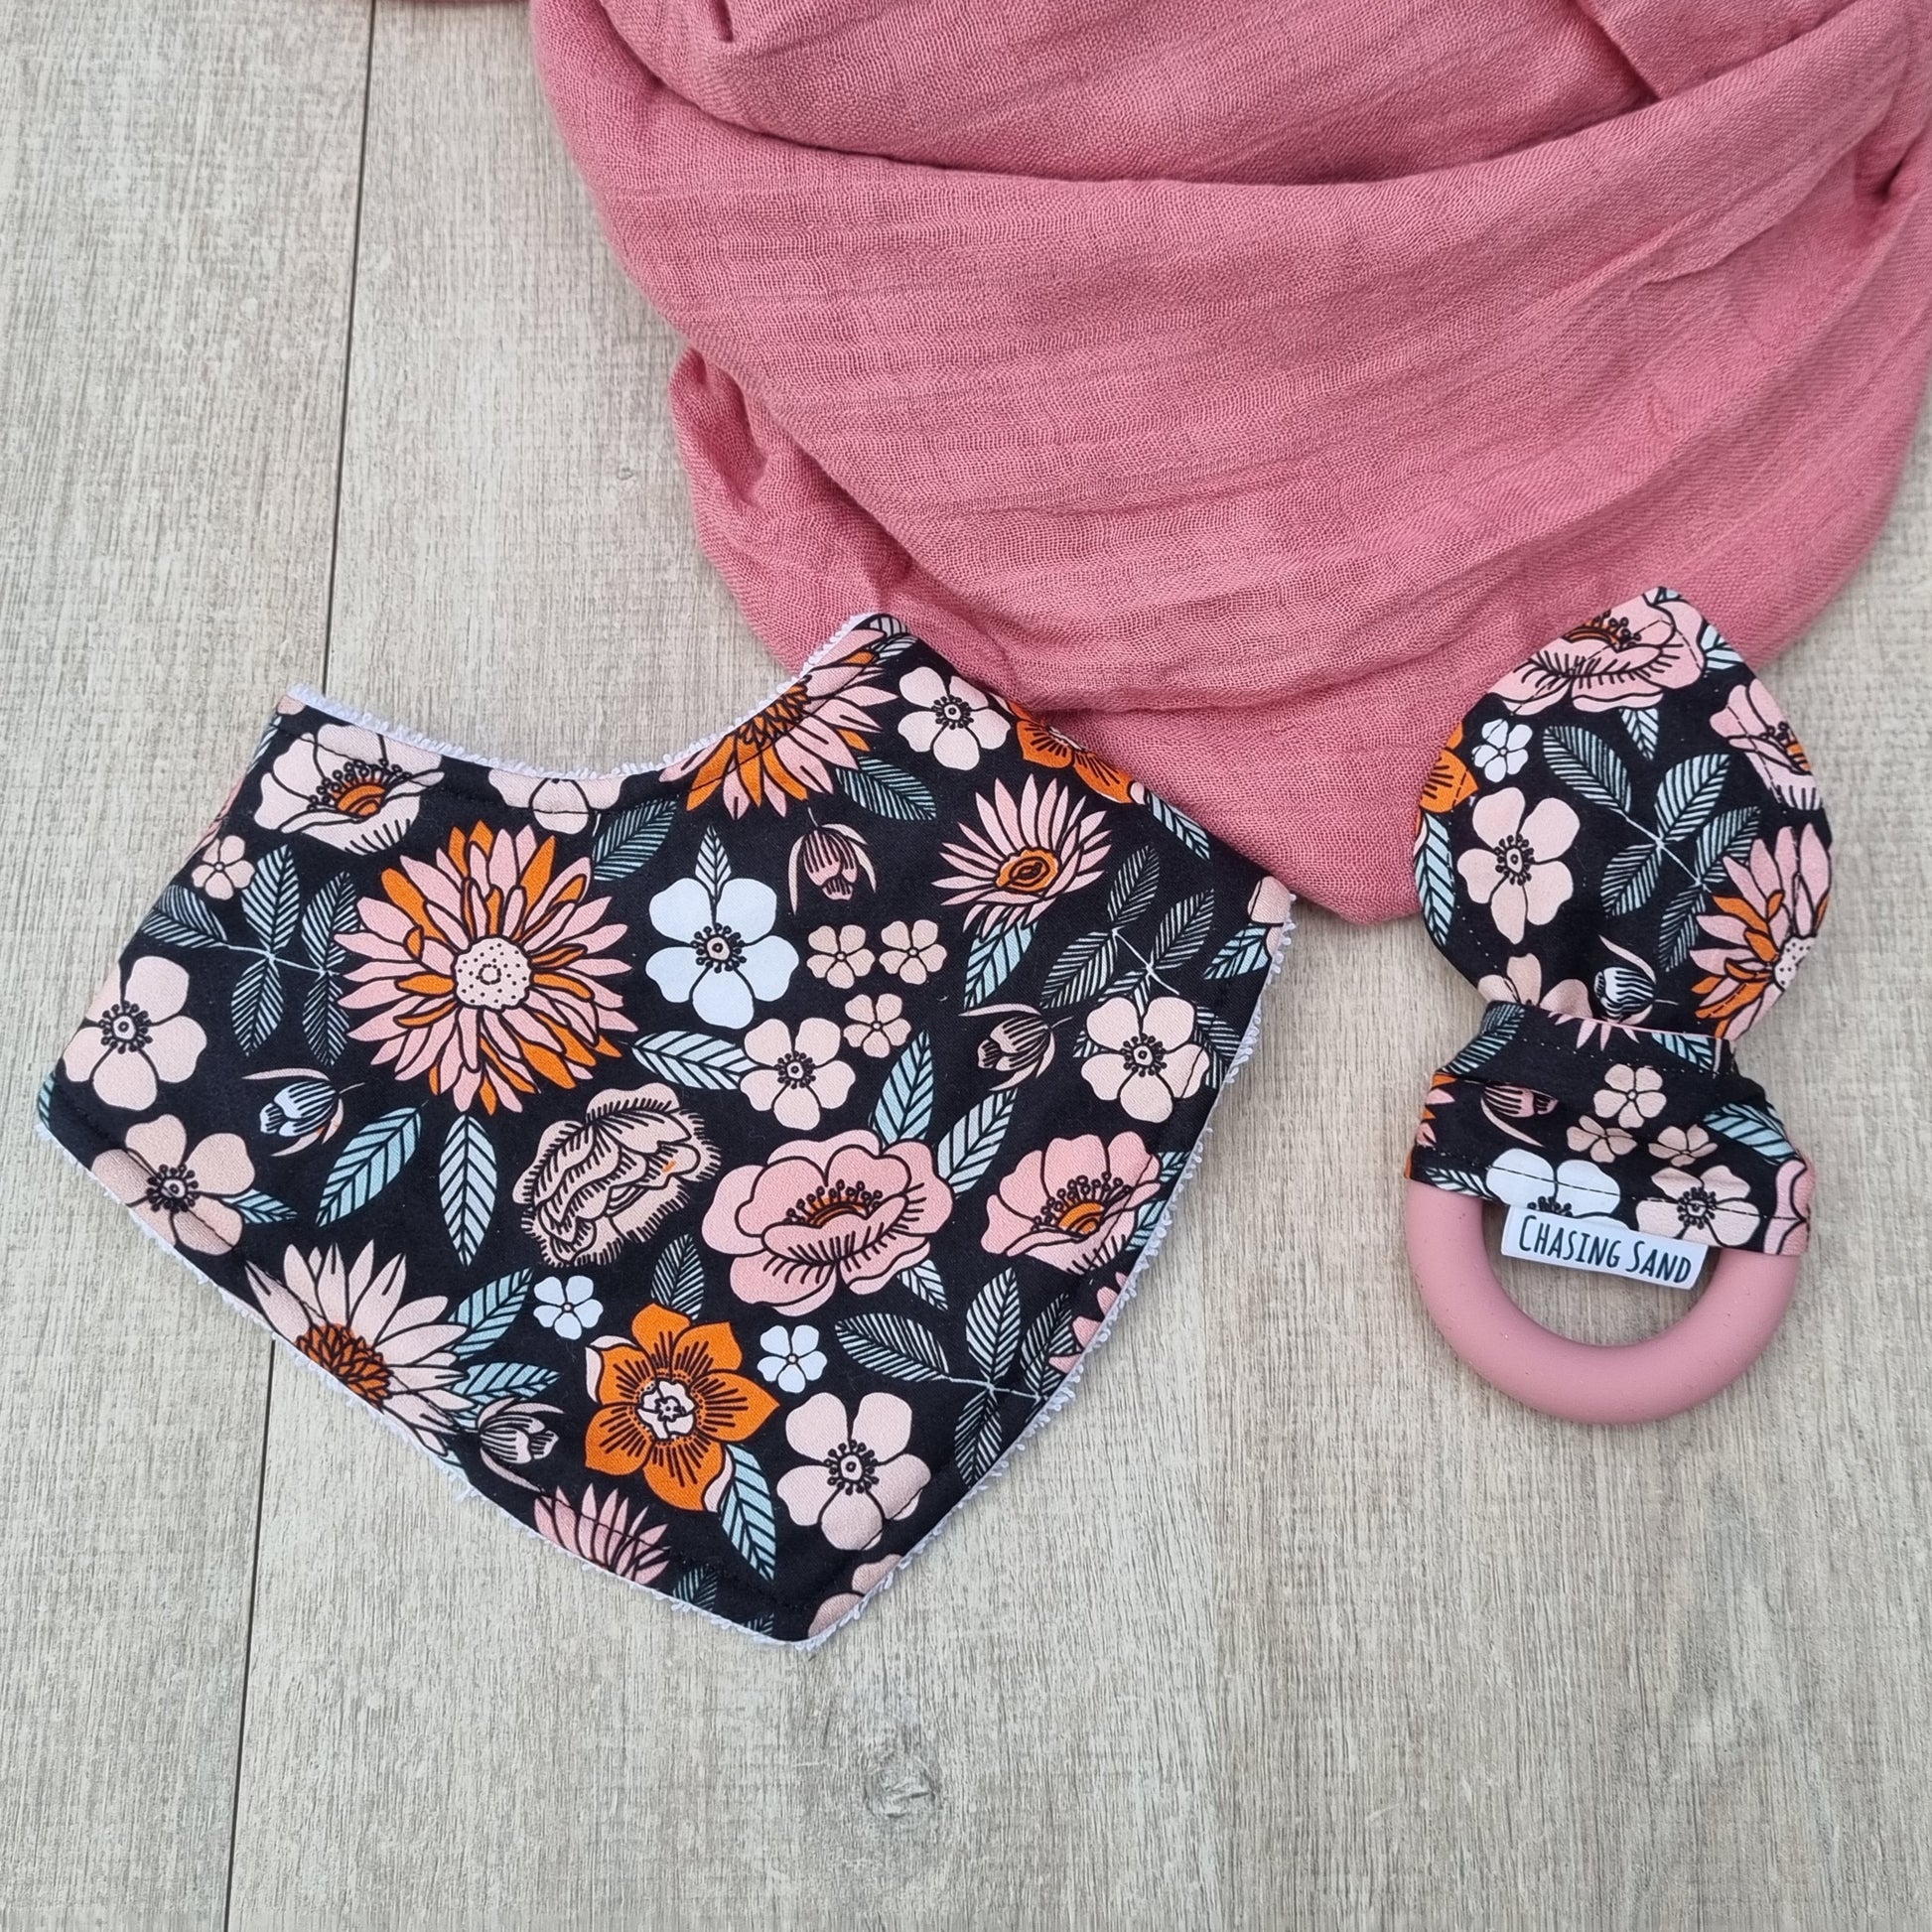 2 Piece Gift Set - Florence against wooden backdrop. Orange and pink flowers with leaves on black background. Each set contains 1x Dribble Bib and 1x Teether.